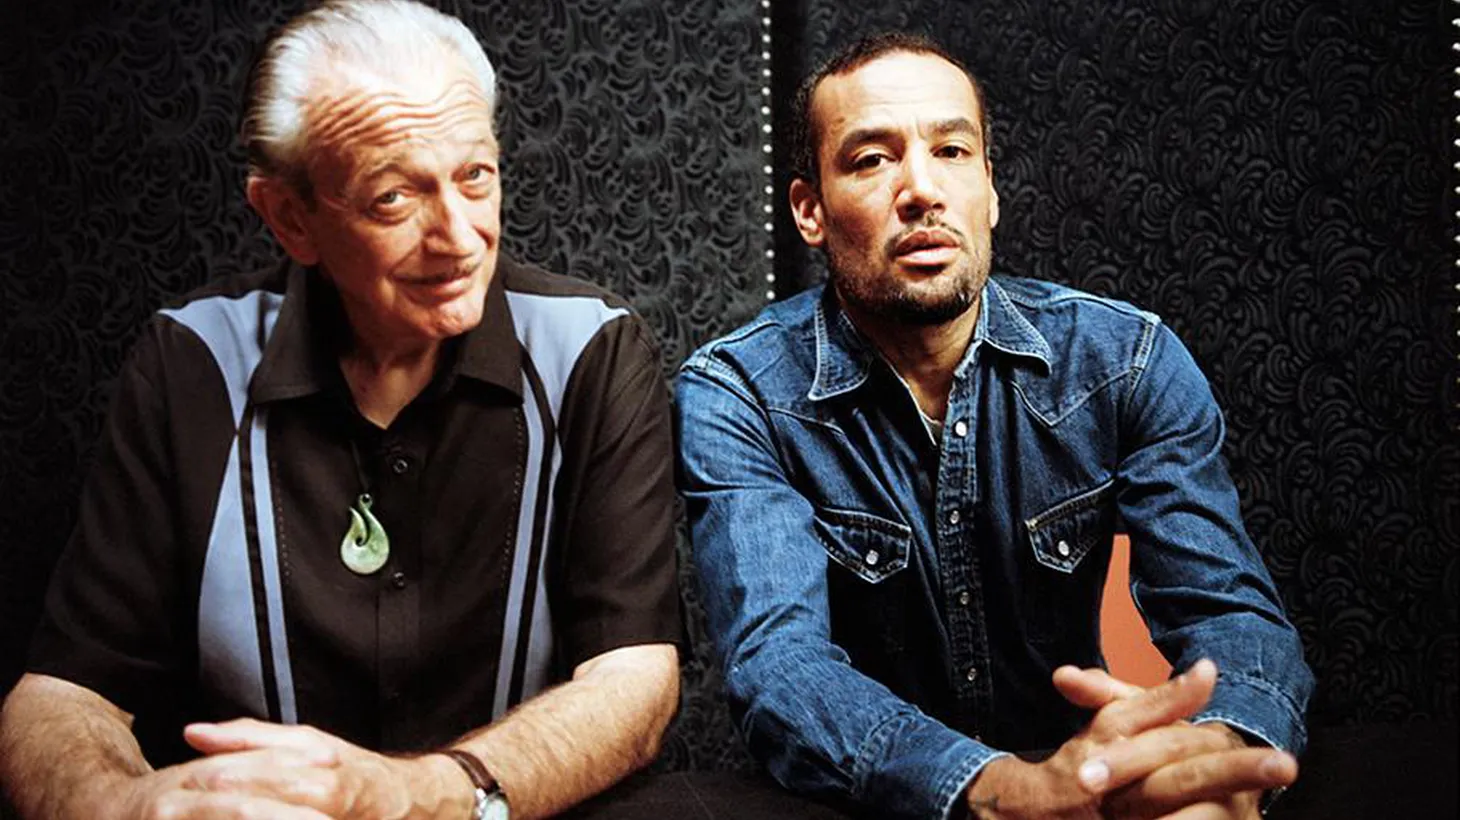 Ben Harper is no stranger to the blues and, when he teams up with harmonica master Charlie Musselwhite, sparks fly.